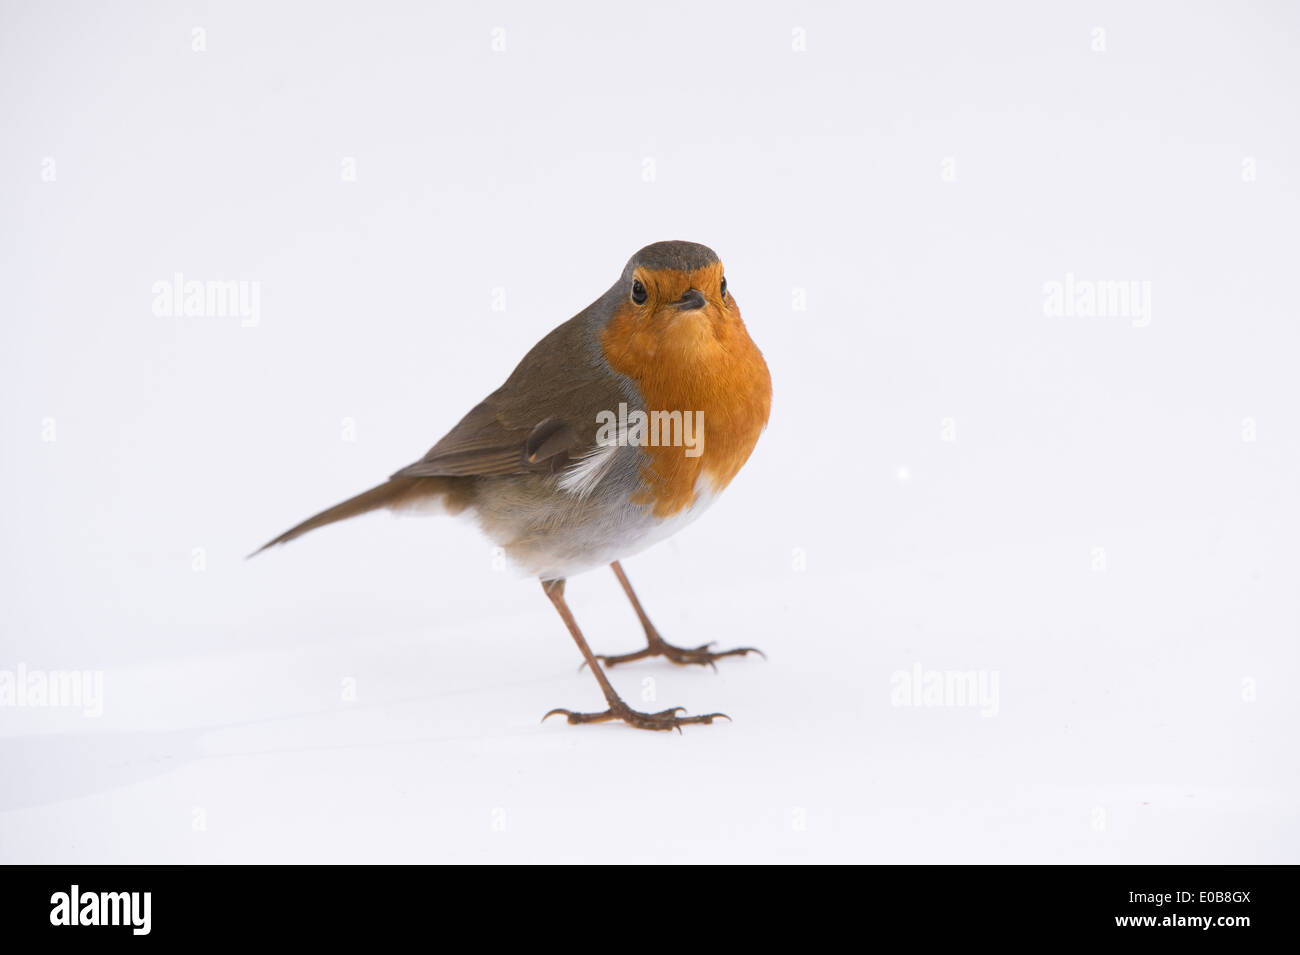 Robin standing against white background Banque D'Images